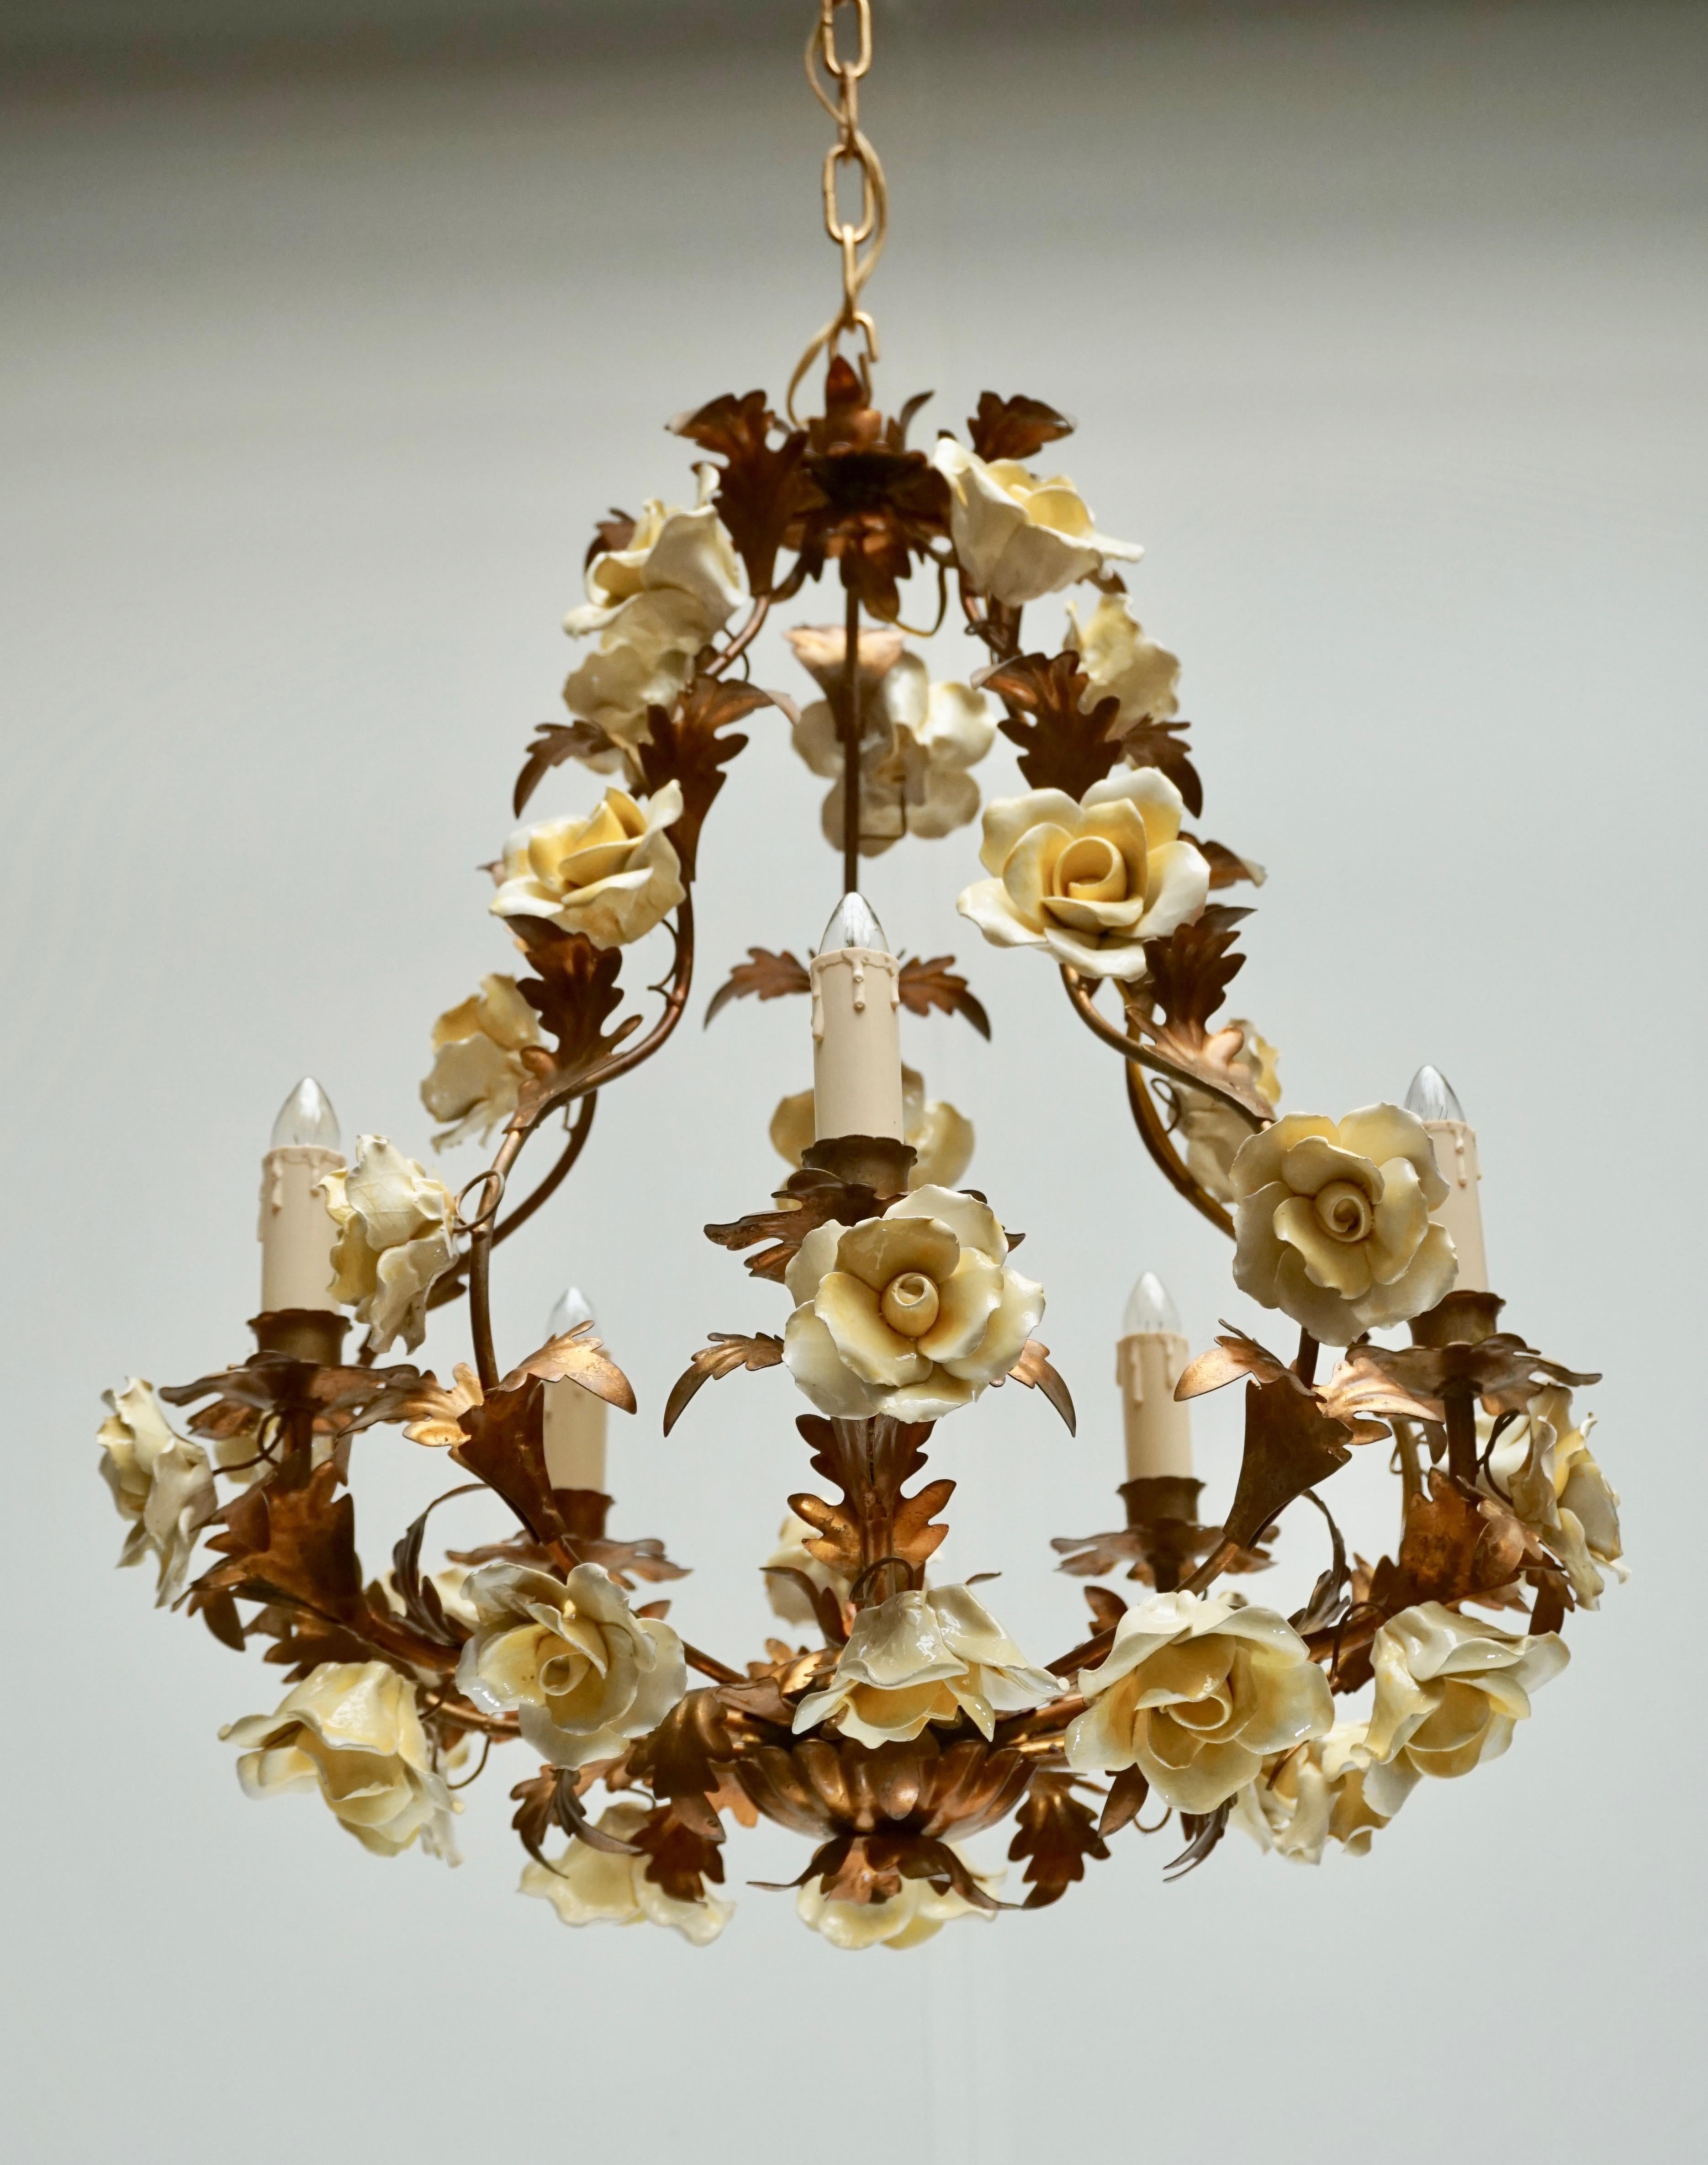 Italian Hollywood Regency six light chandelier in brass with yellow porcelain flowers.
Diameter 50 cm.
Height fixture 55 cm.
Total height including the chain 180 cm.